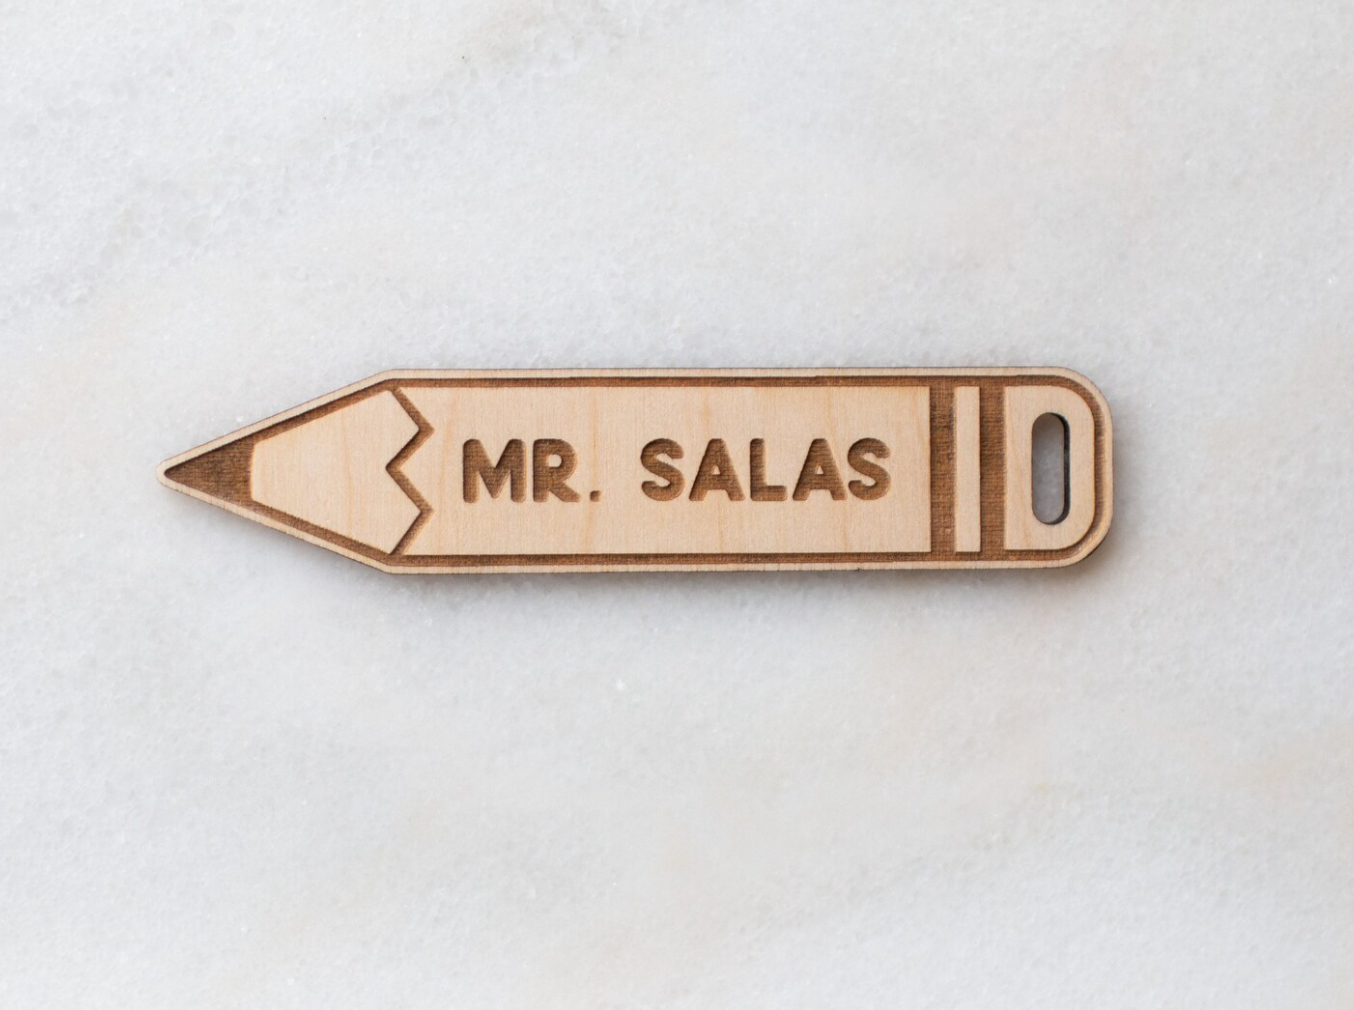 Personalized Pencil Teacher Tags